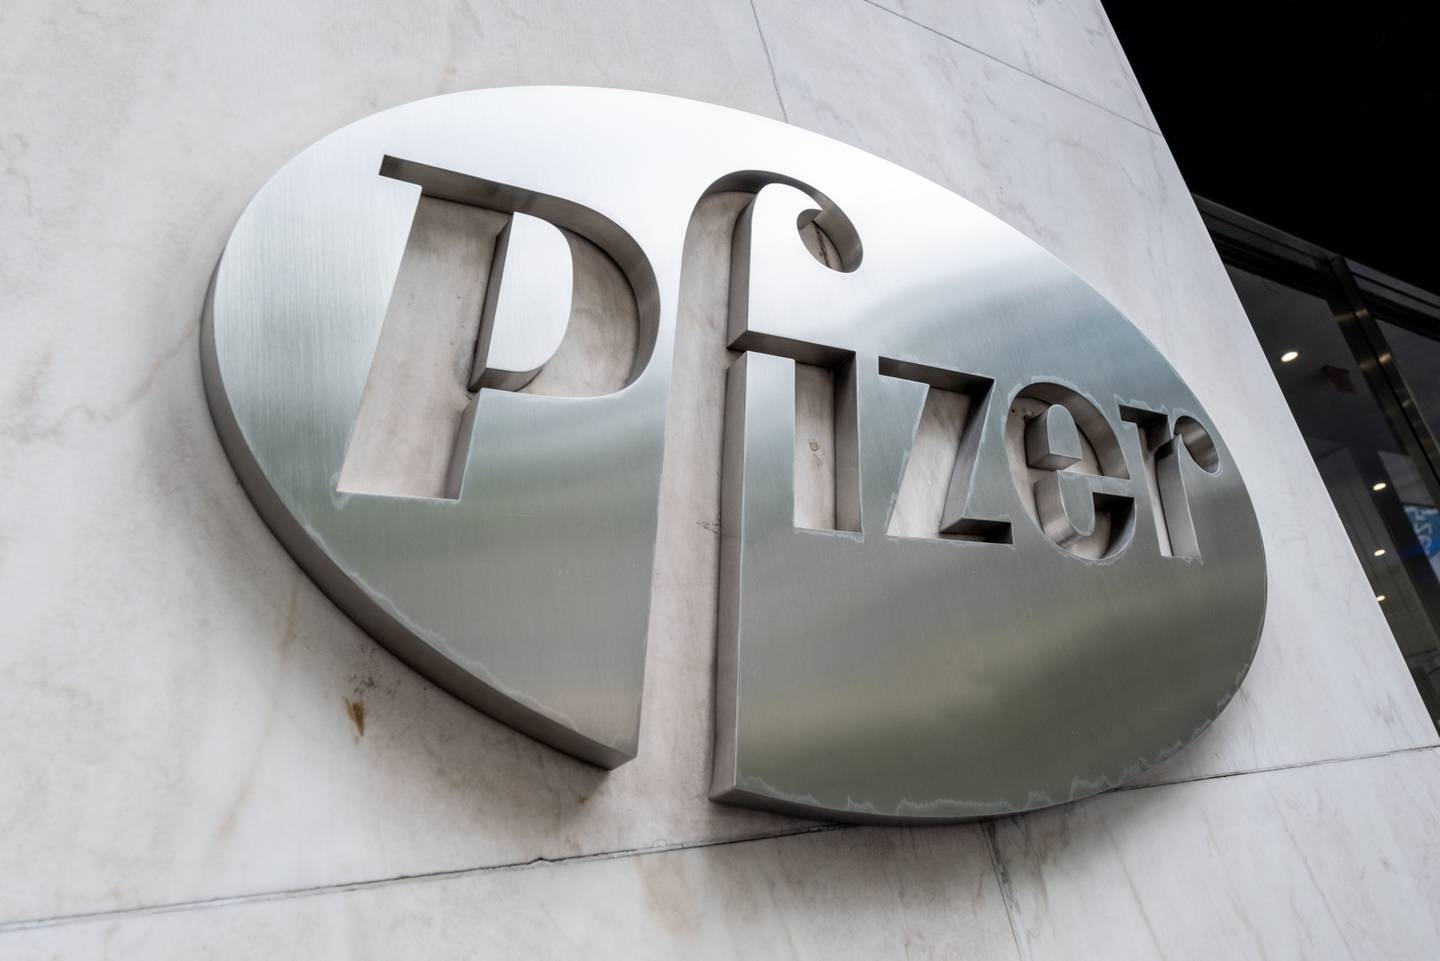 Pfizer Inc. signage is displayed outside the company's headquarters in New York.